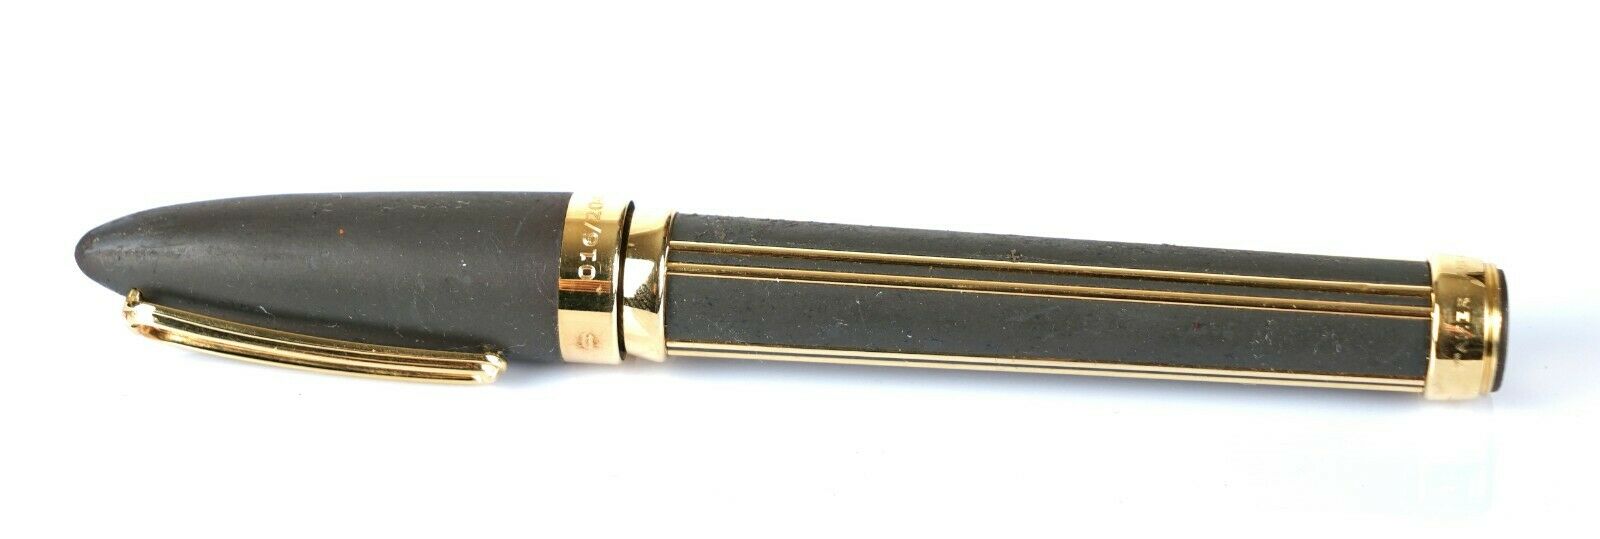 MONTEGRAPPA -32nd AMERICA'S CUP- 16/204 LIMITED EDITION 18K GOLD NIB FOUNTAIN PEN